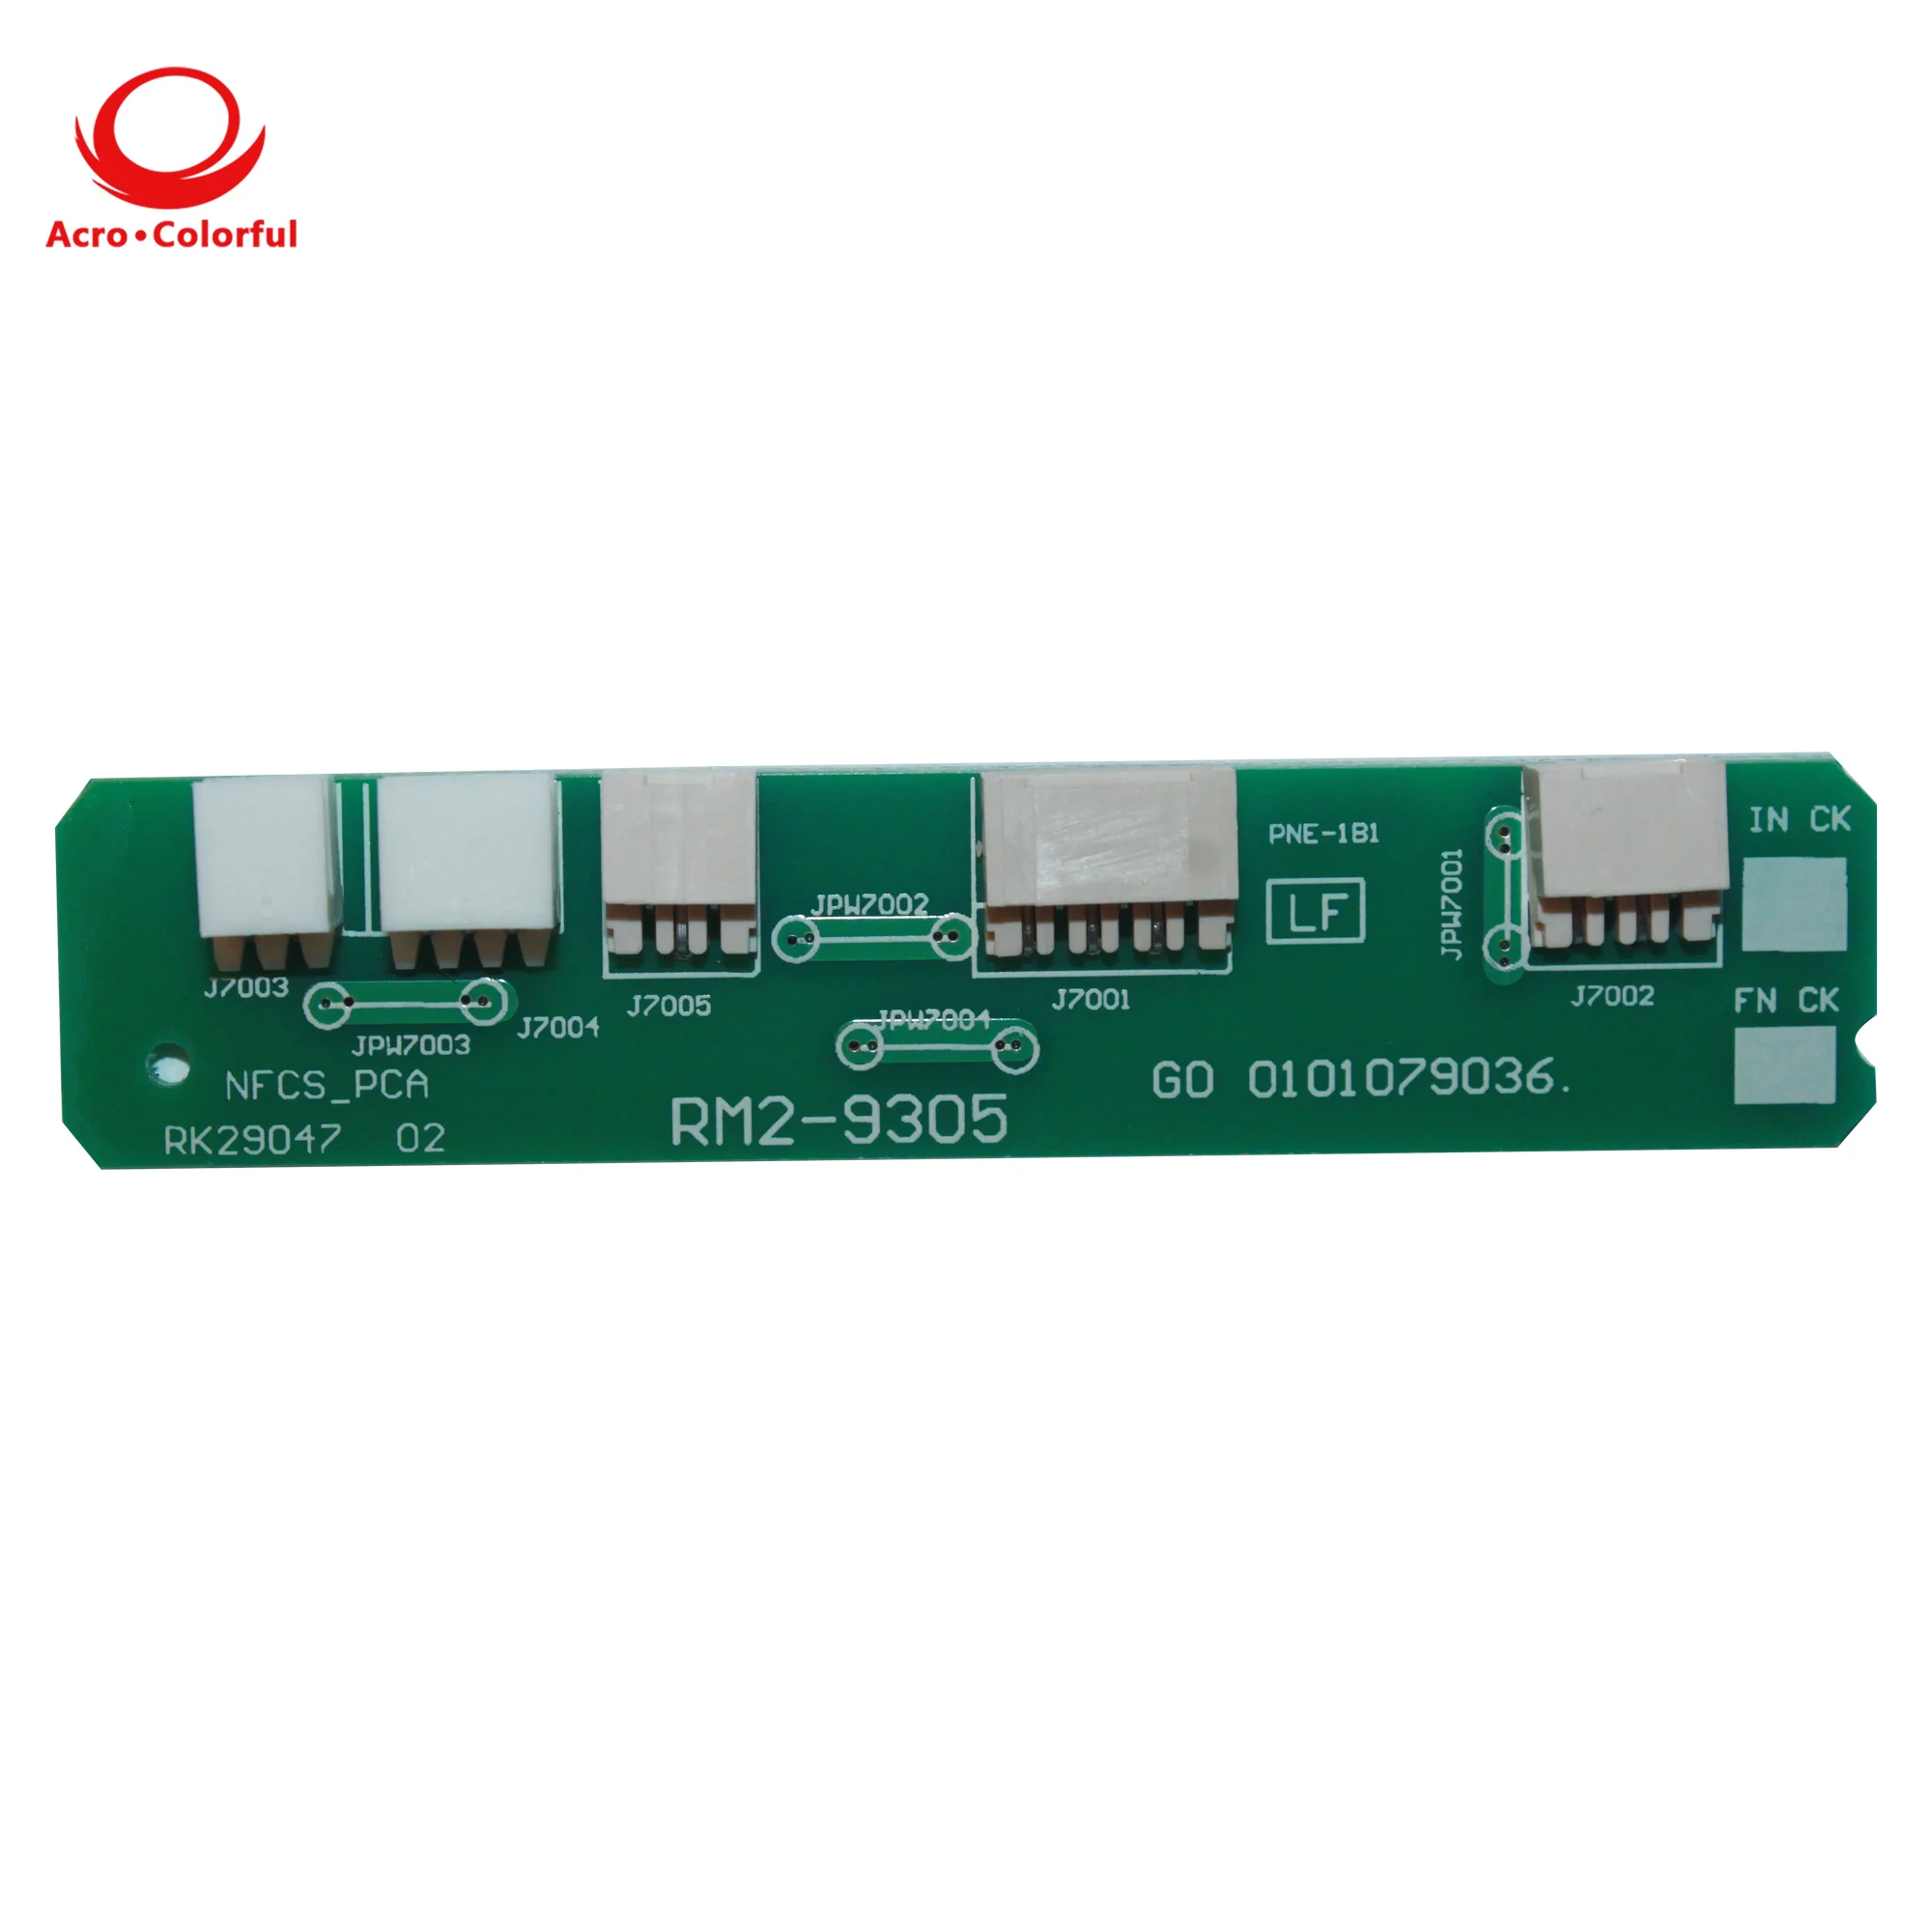 Compatible RM2-9506 RM2-9305 Fuser Reset Card Chip Apply to HP M607 M608 M609 M631 M632 M633 E62555 Printer